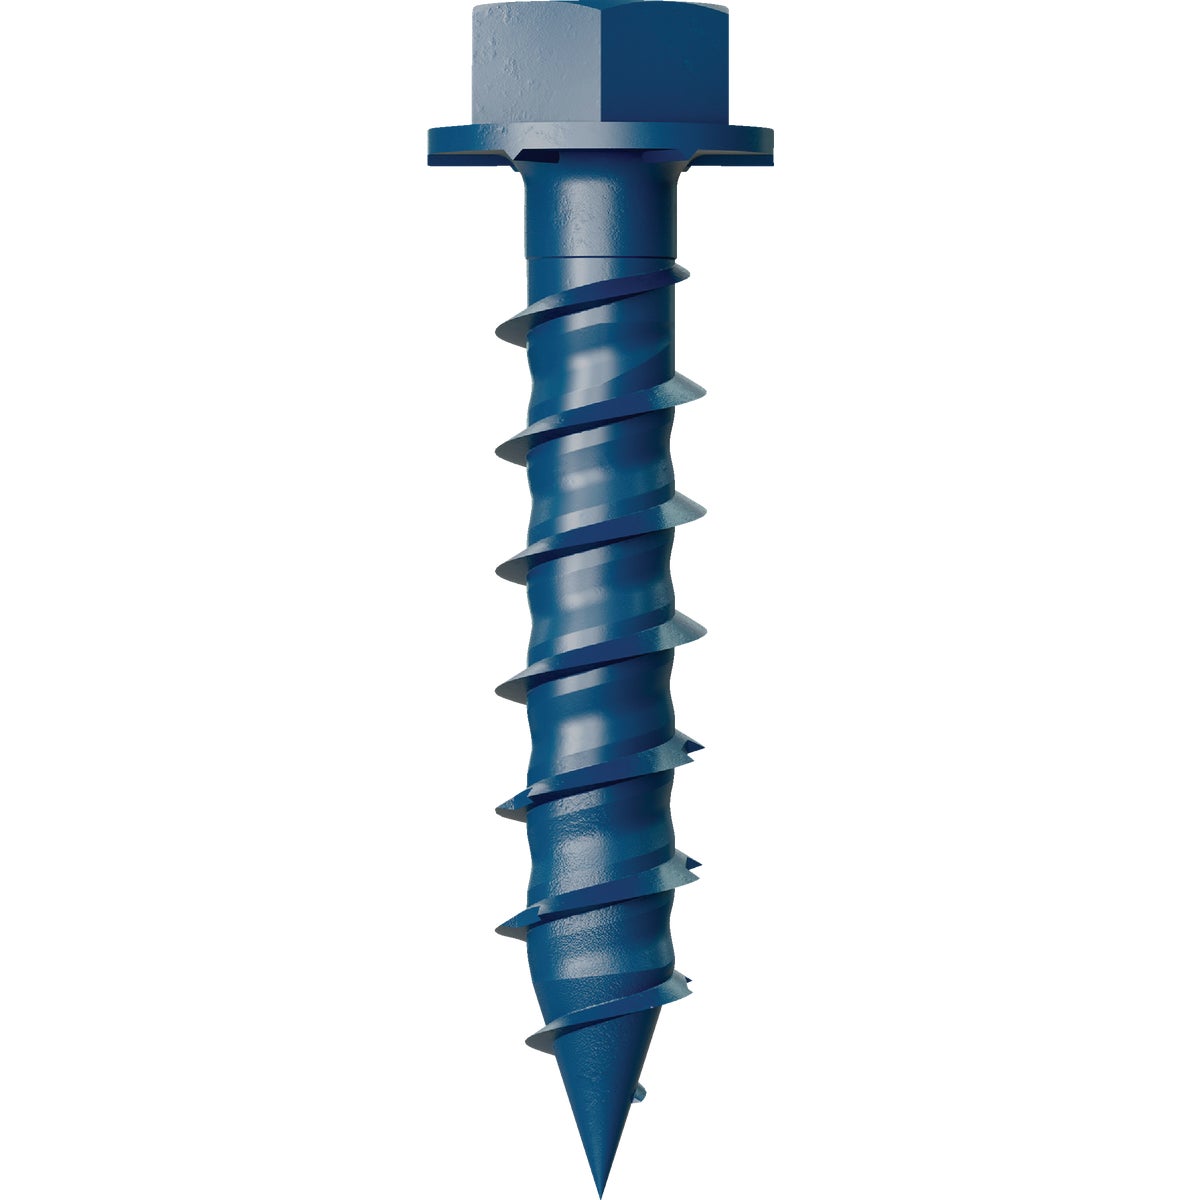 Simpson Strong-Tie Titen Turbo  1/4 in. x 1-1/4 in. Hex-Head Concrete and Masonry Screw, Blue (75-Qty)